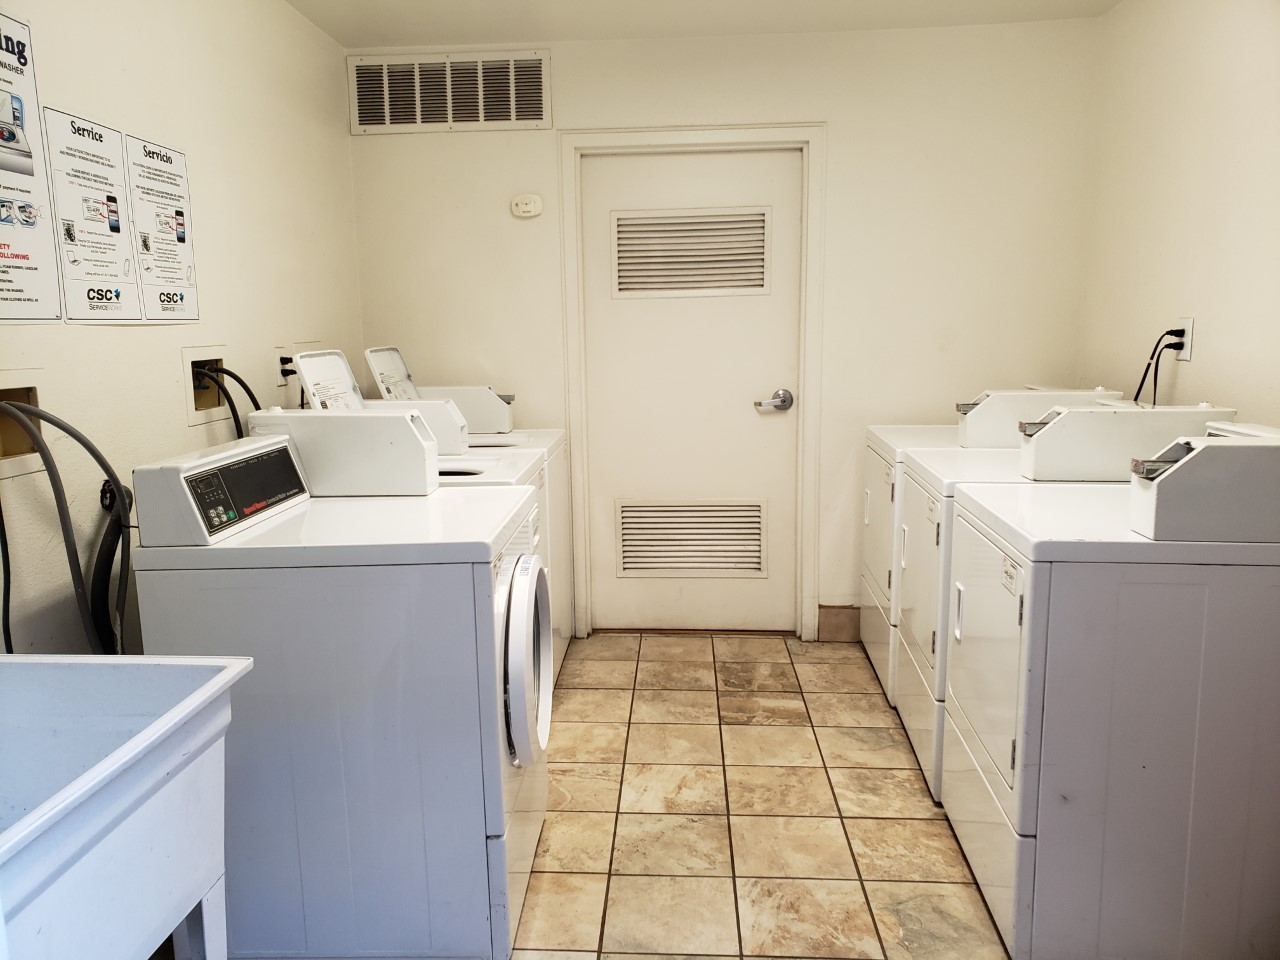 Laundry room with six machines that are across each other. Walls have posted signs.